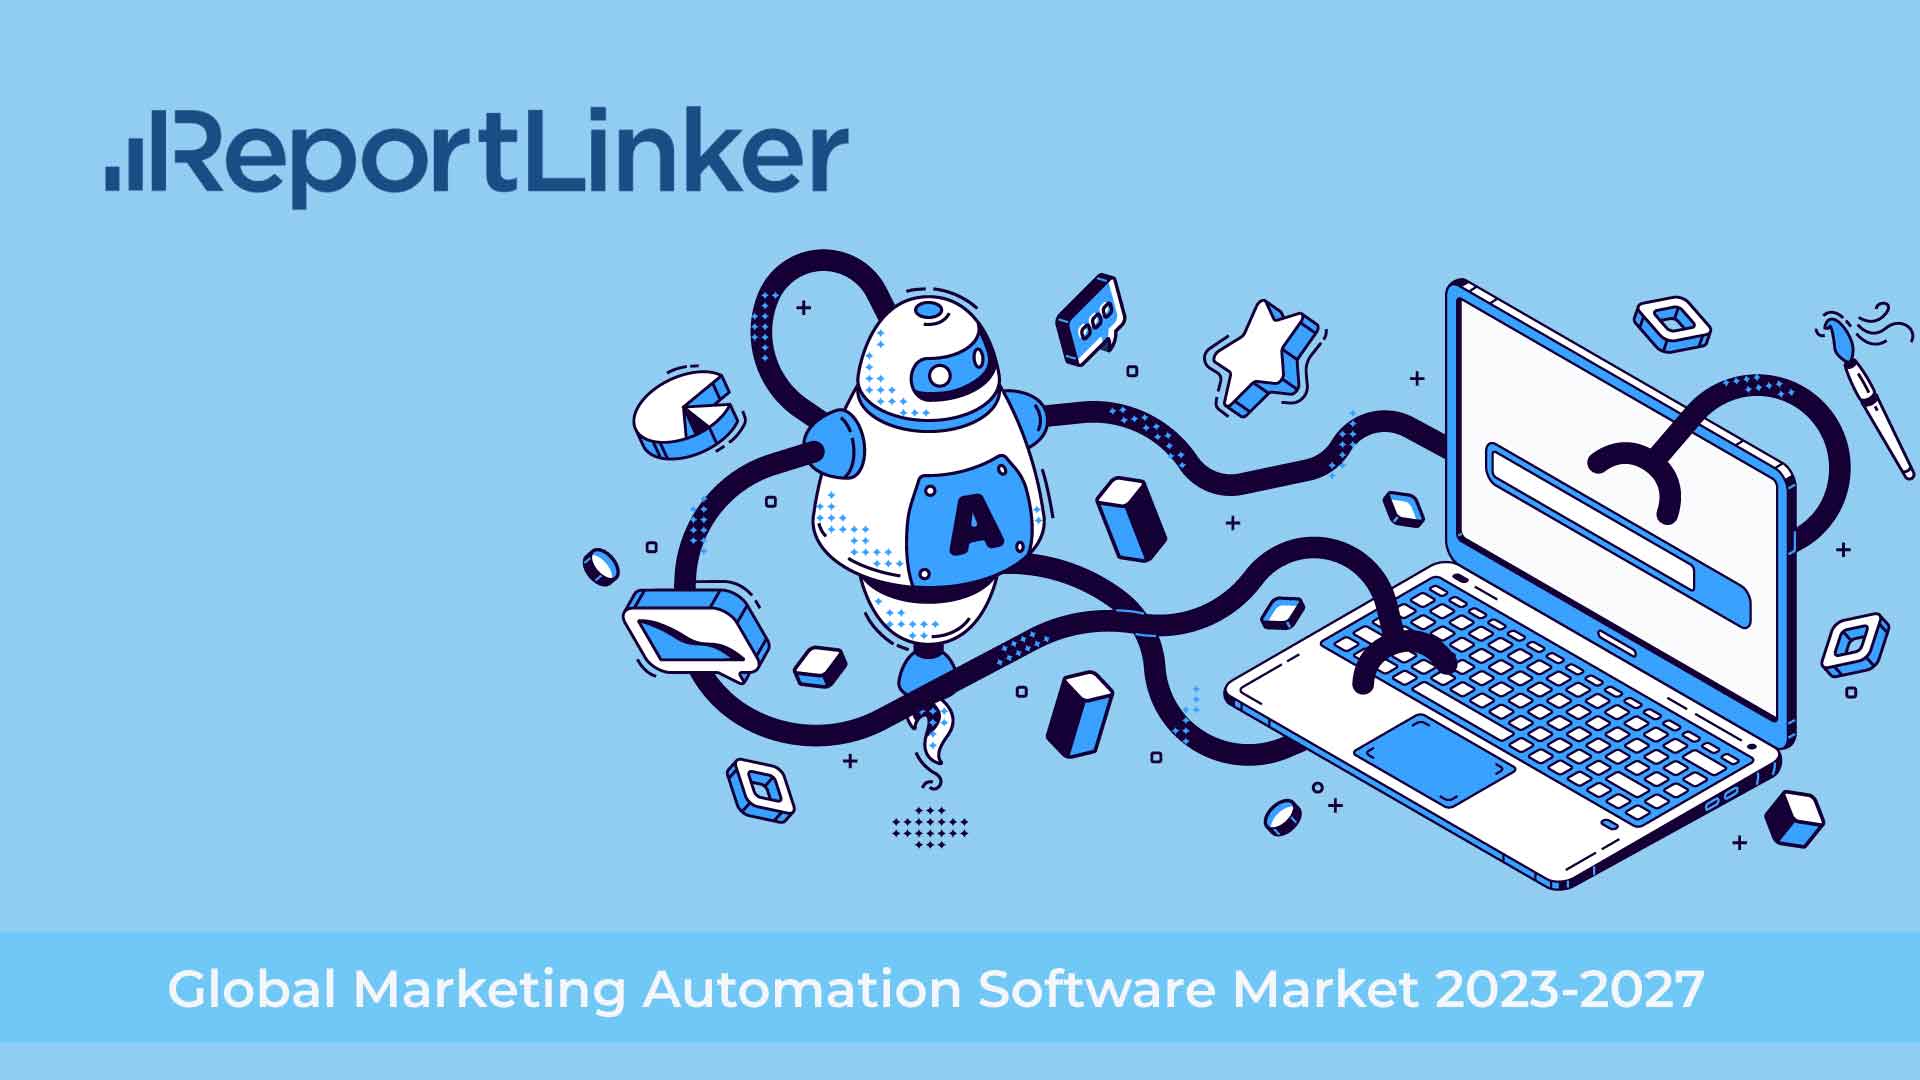 The Global Marketing Automation Software Market is expected to grow by $2,707.36 mn from 2023-2027, accelerating at a CAGR of 11.98% during the forecast period